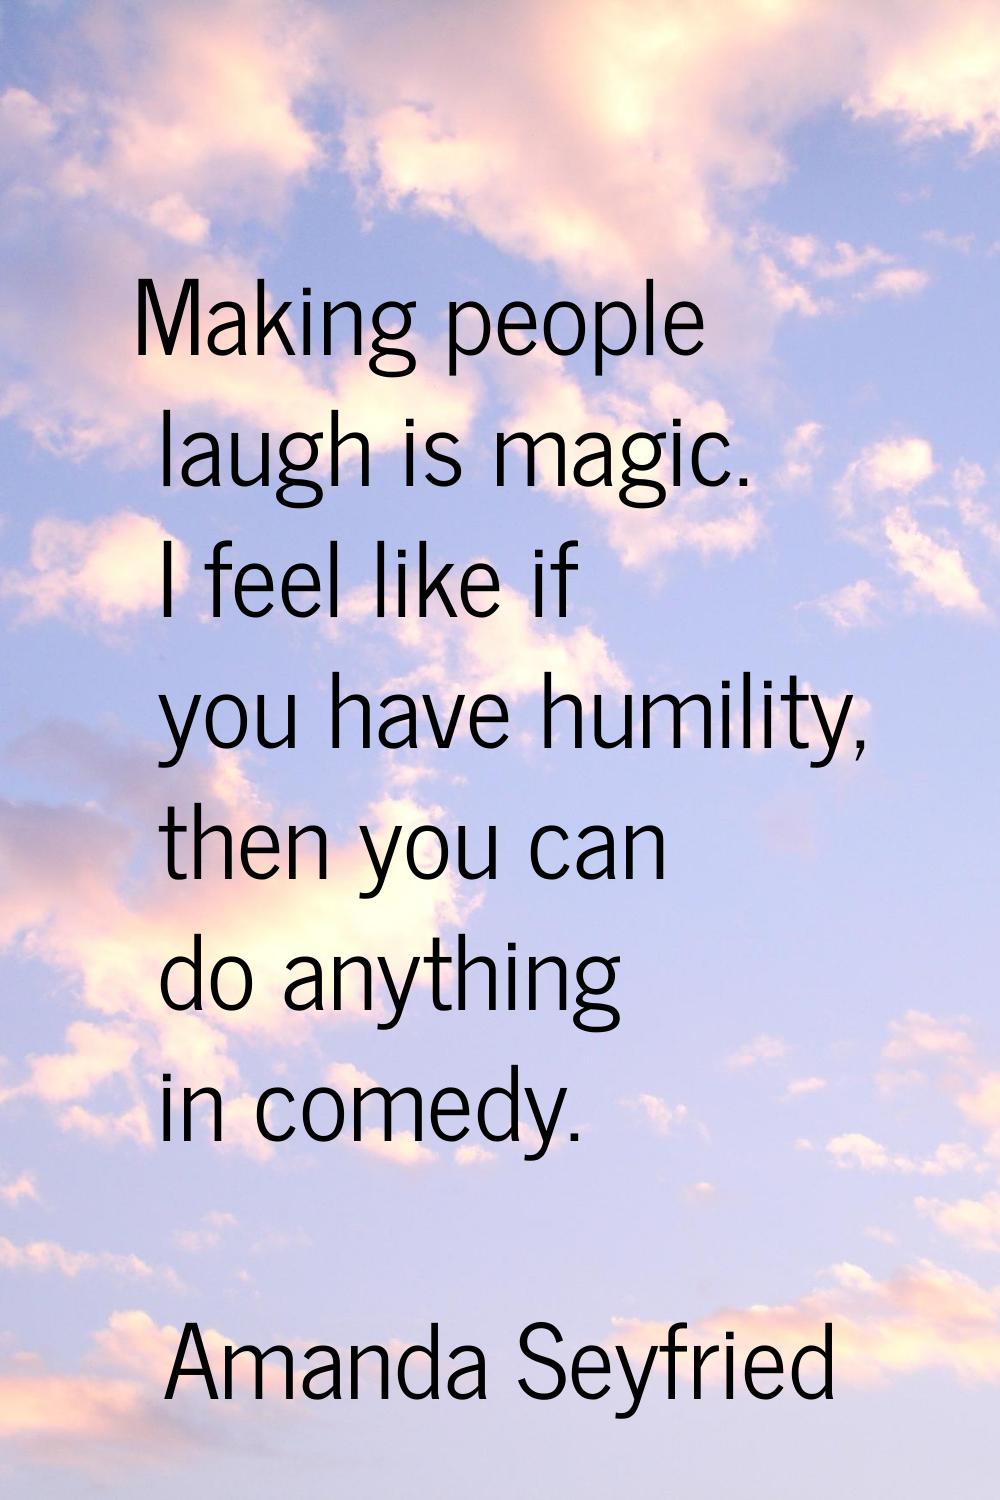 Making people laugh is magic. I feel like if you have humility, then you can do anything in comedy.